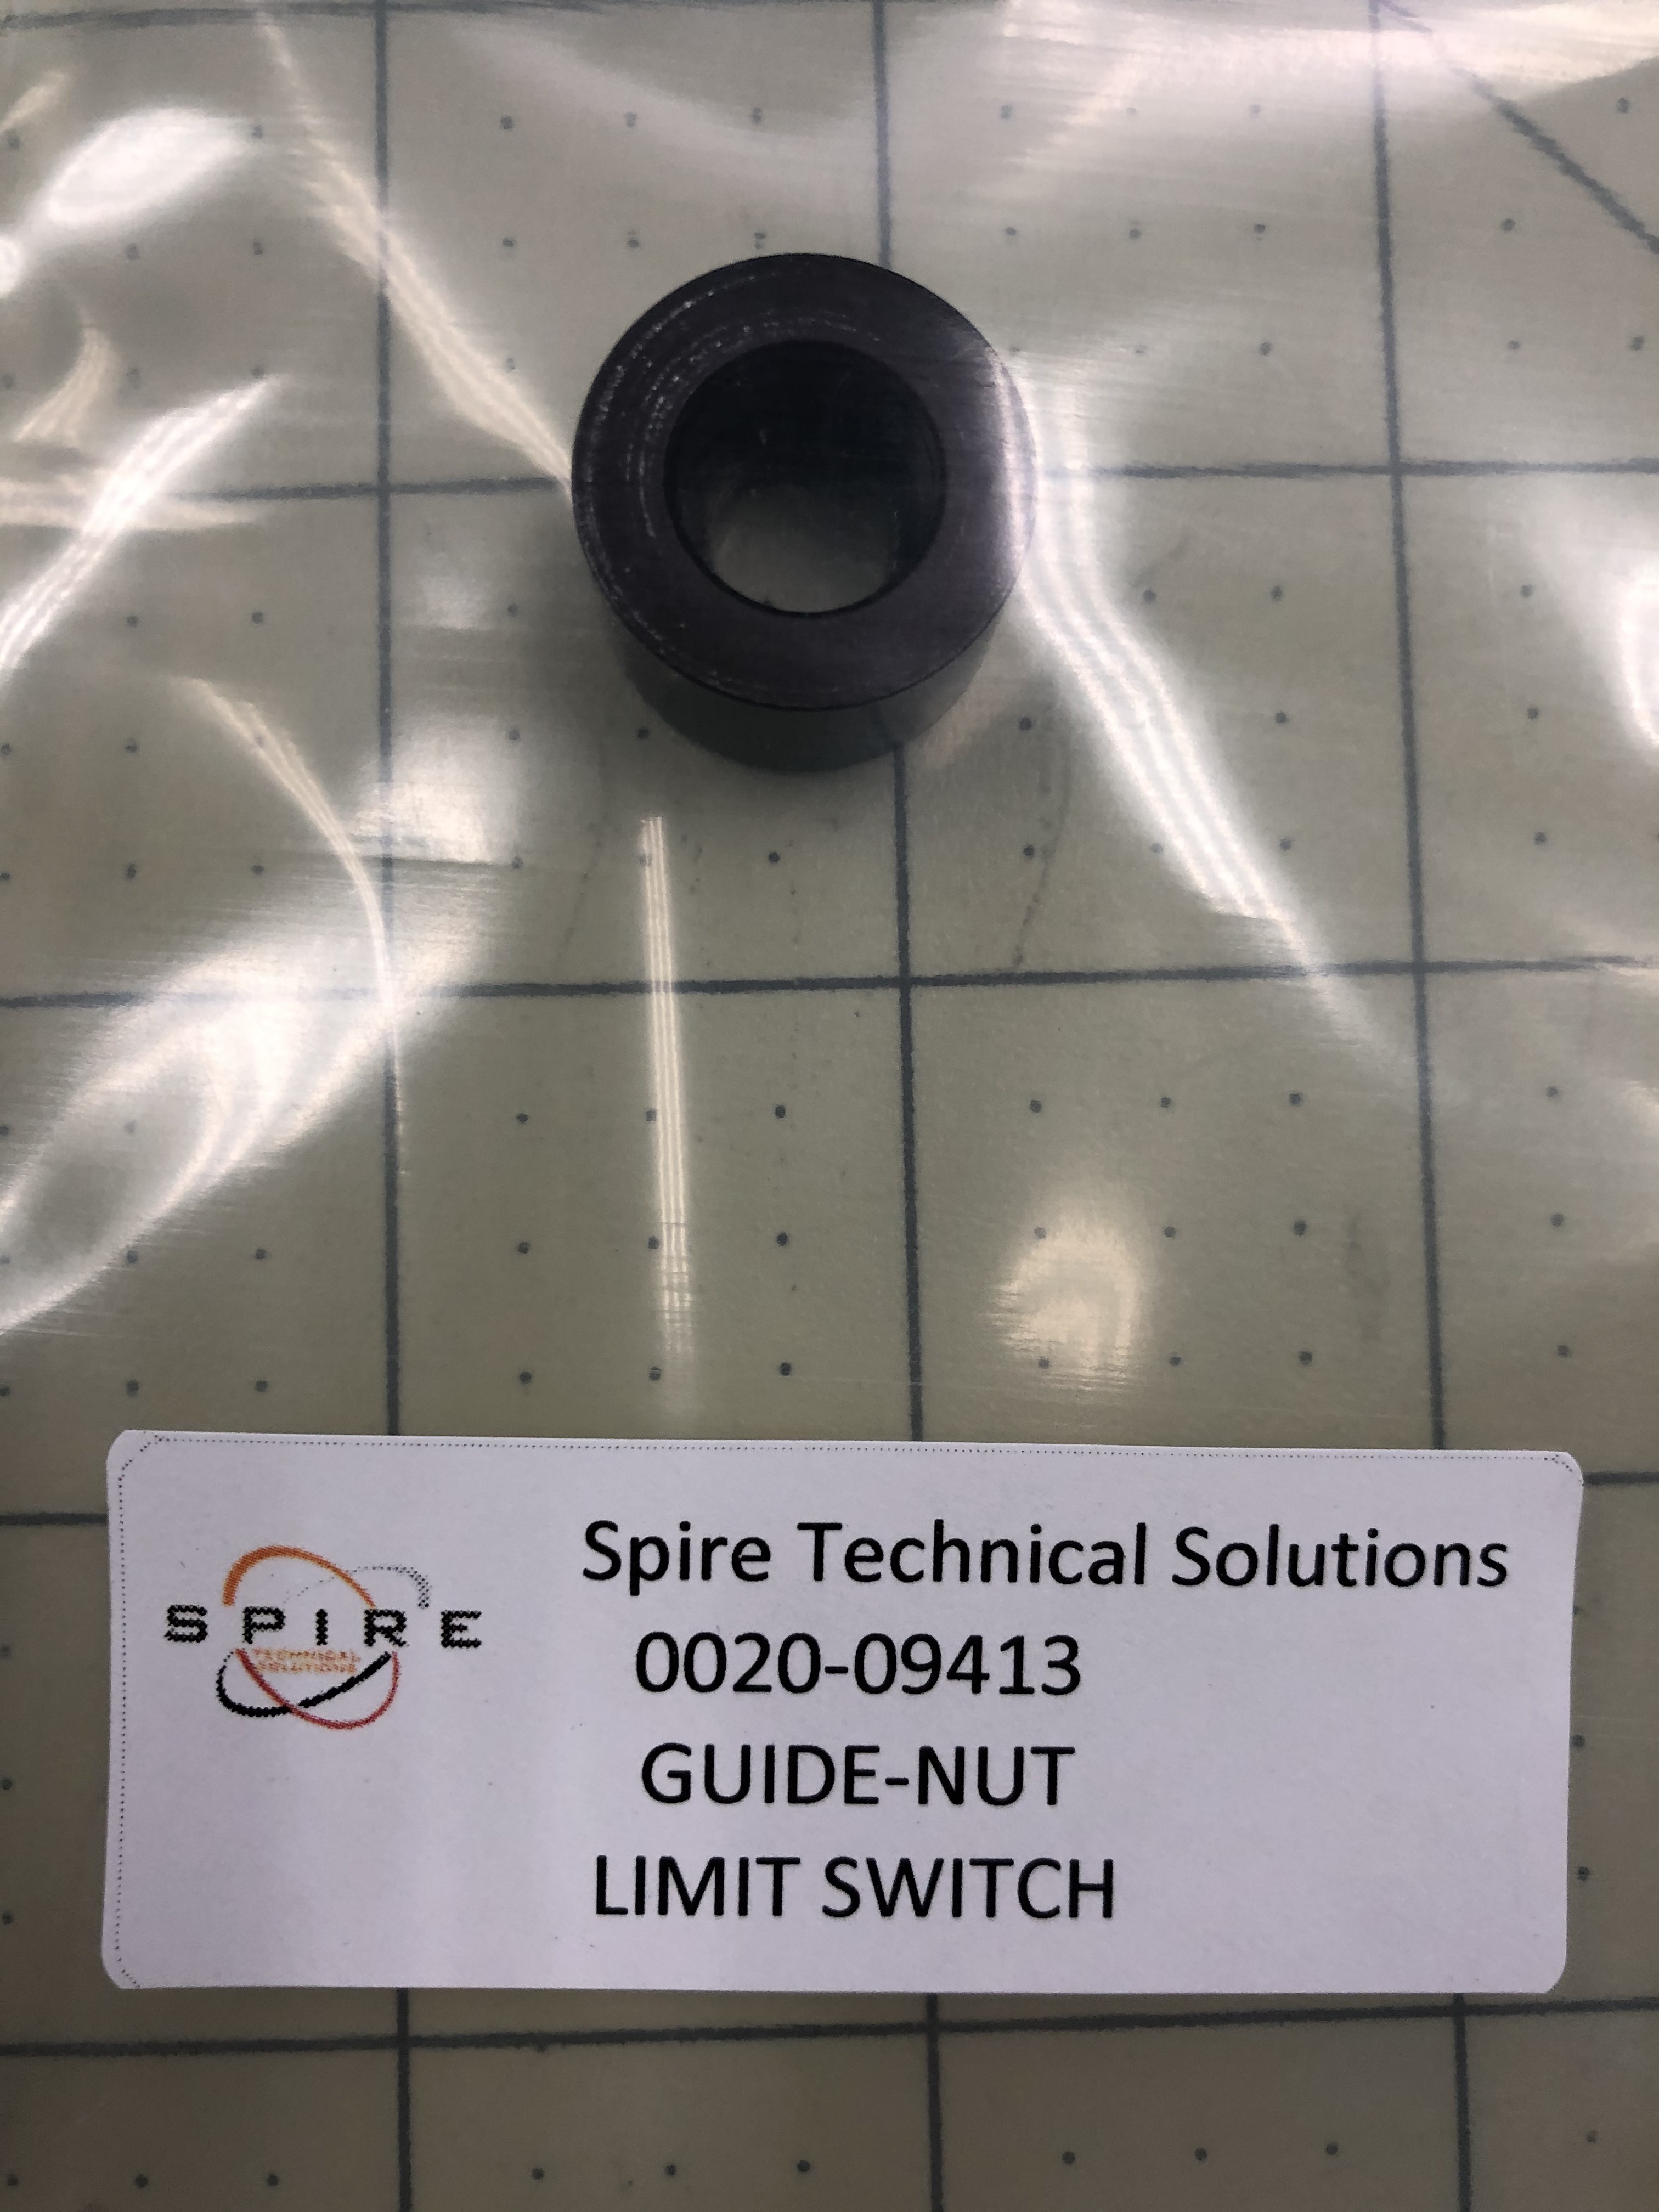 GUIDE-NUT, LIMIT SWITCH